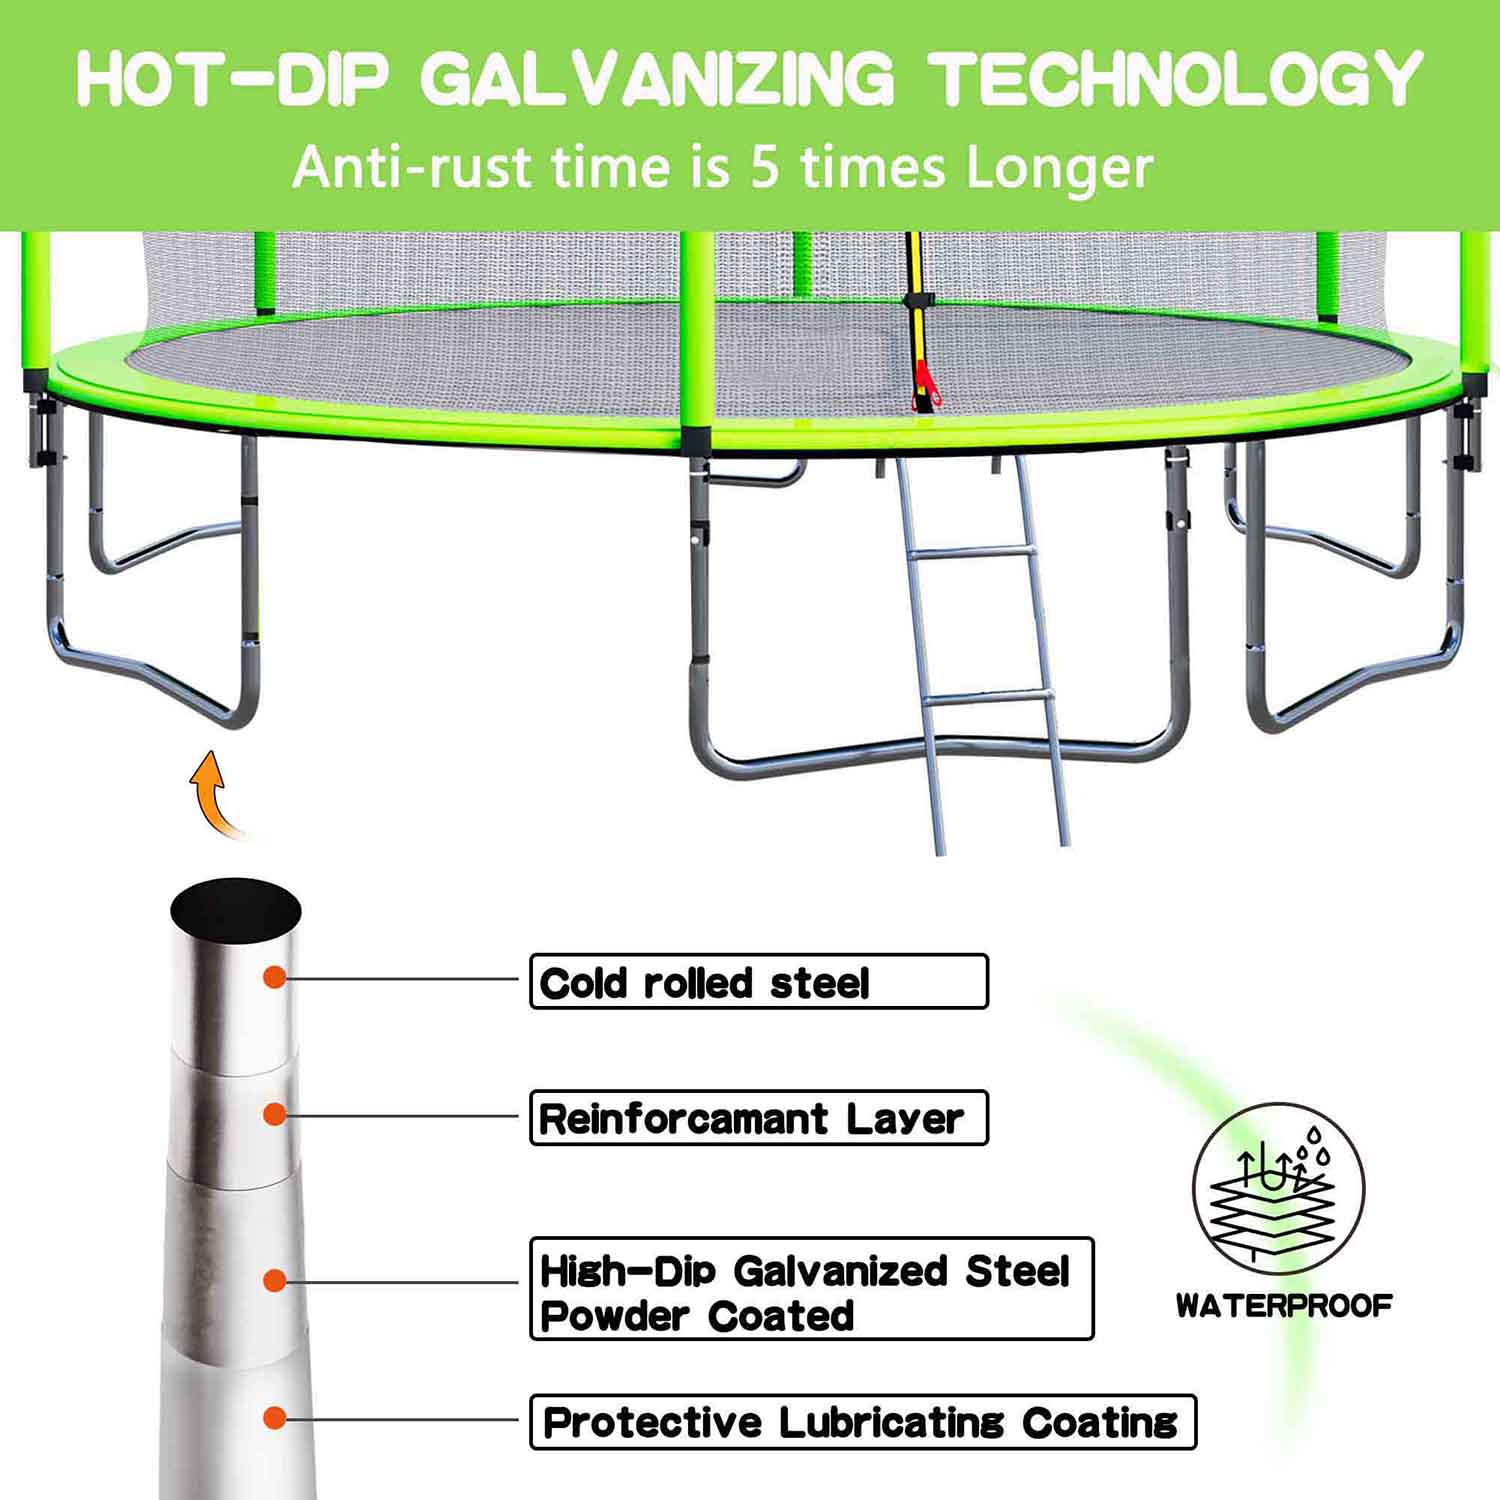 10ft trampoline frame made HOT-DIP GALVANIZING TECHNO LOGY Anti-rust time is 5 timesLonger